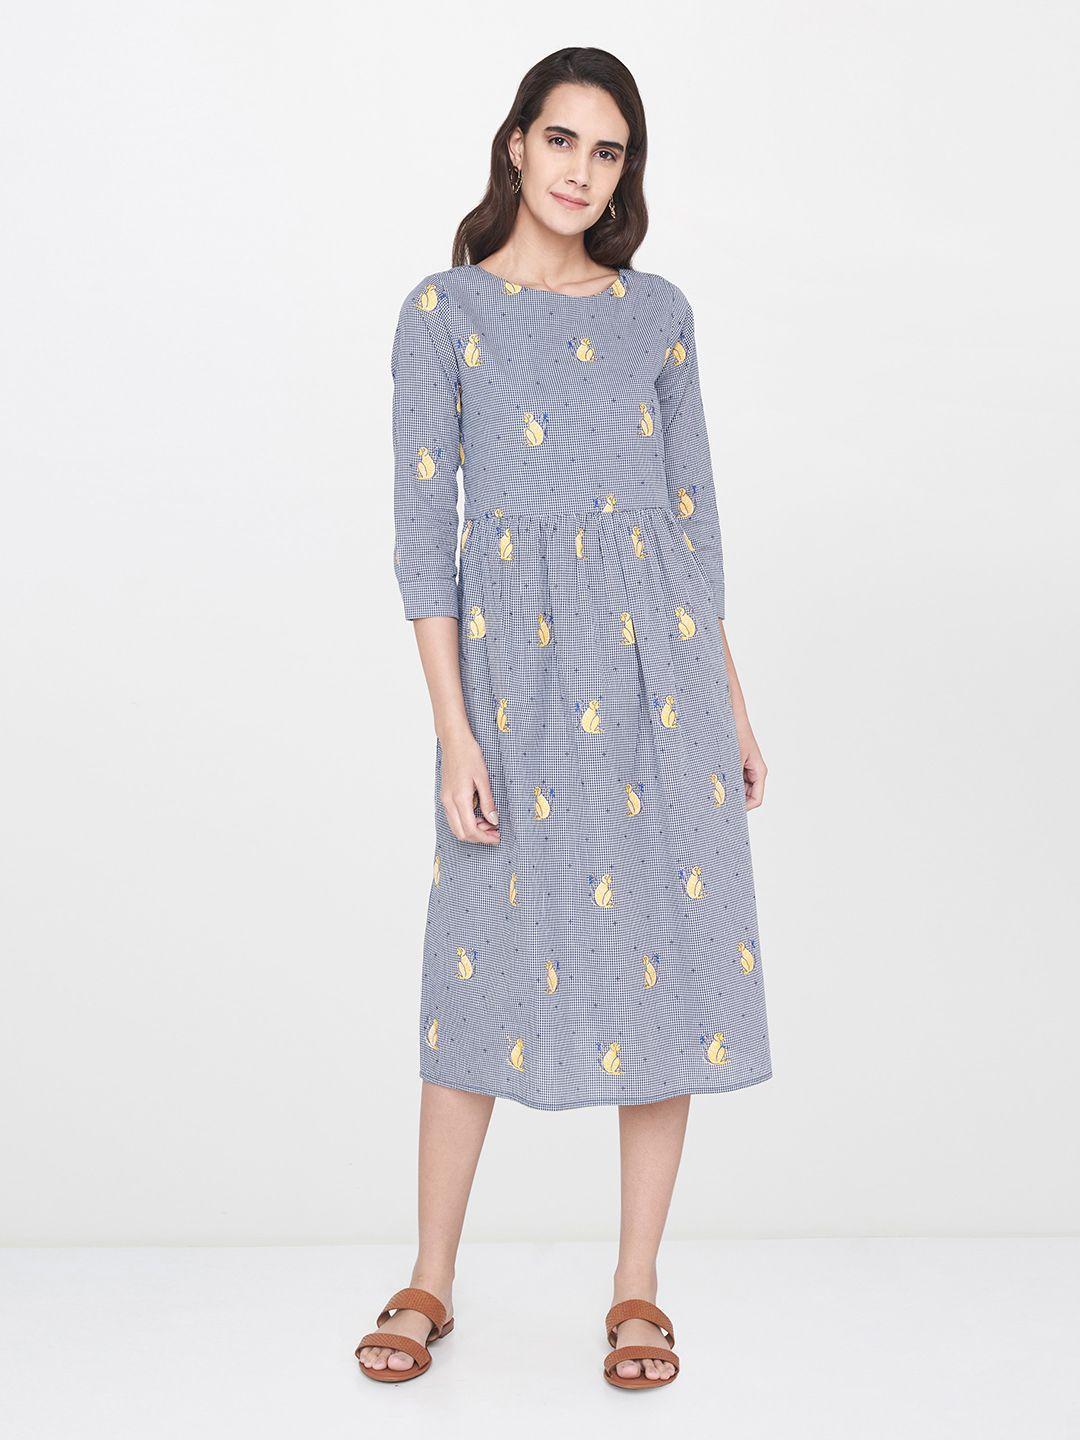 global desi women navy & white printed fit and flare dress